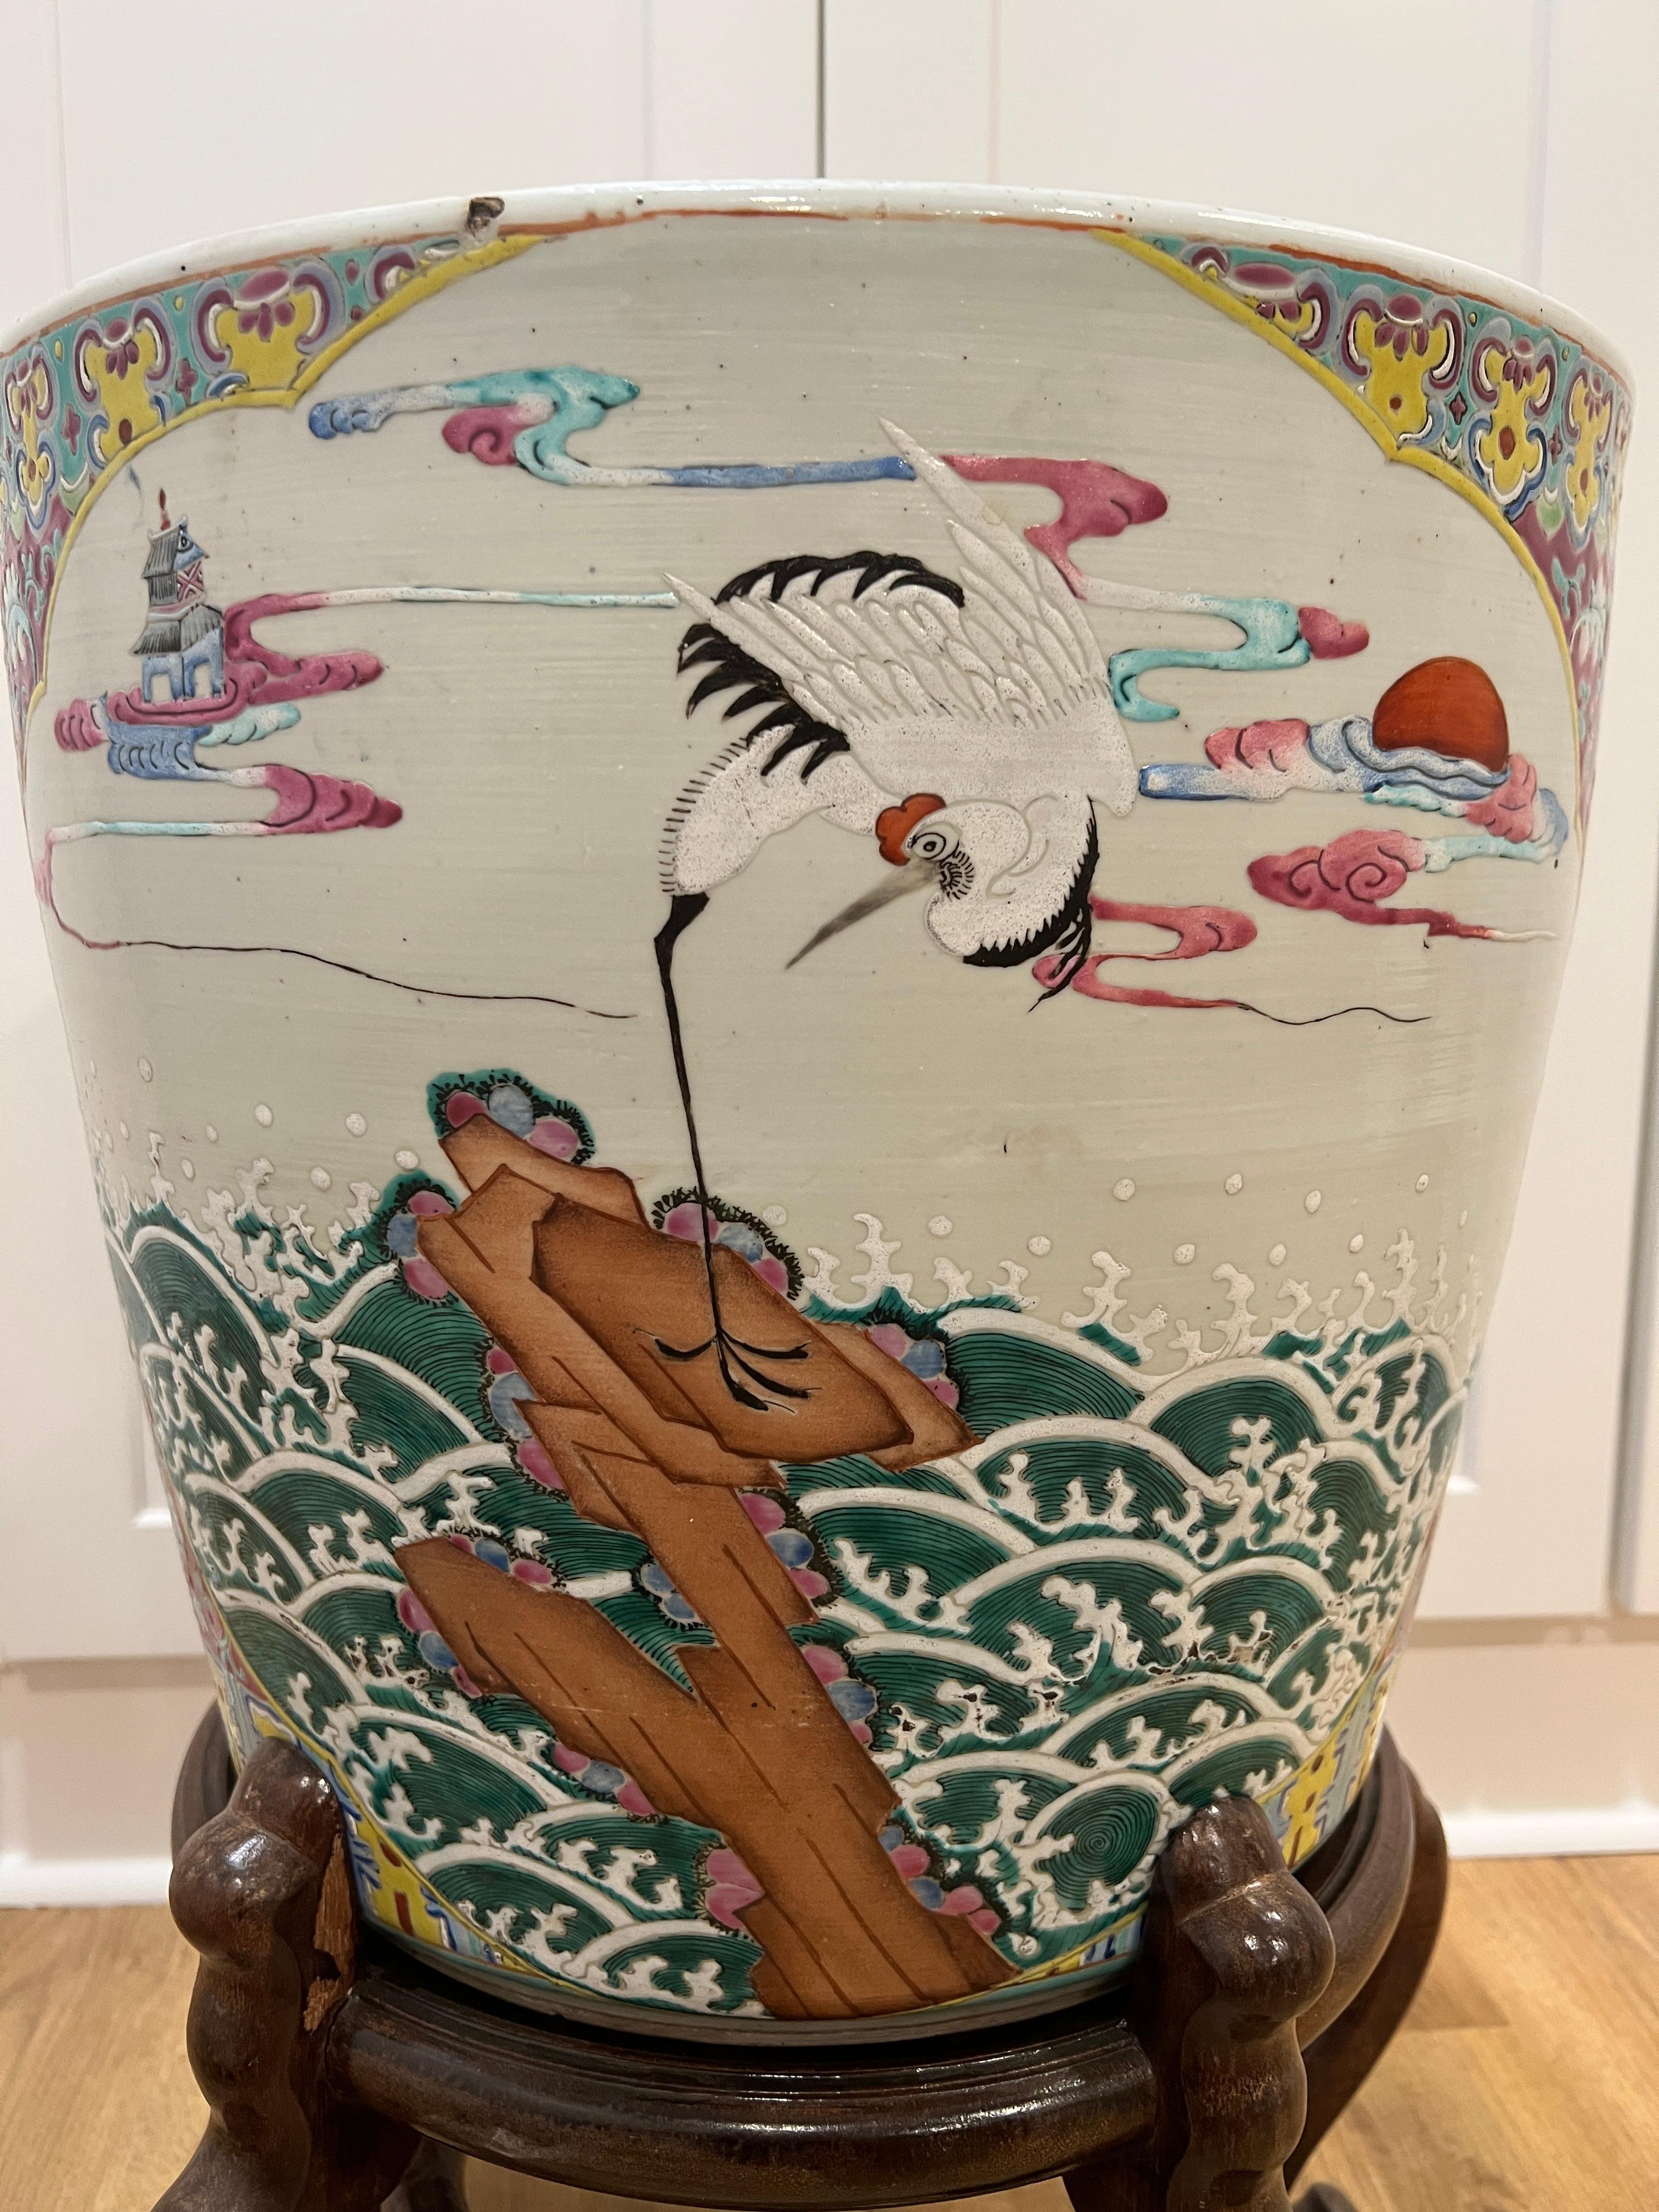 19th Century, Chinese Export Famille Rose Porcelain Planter or Fish Bowl In Good Condition For Sale In Atlanta, GA